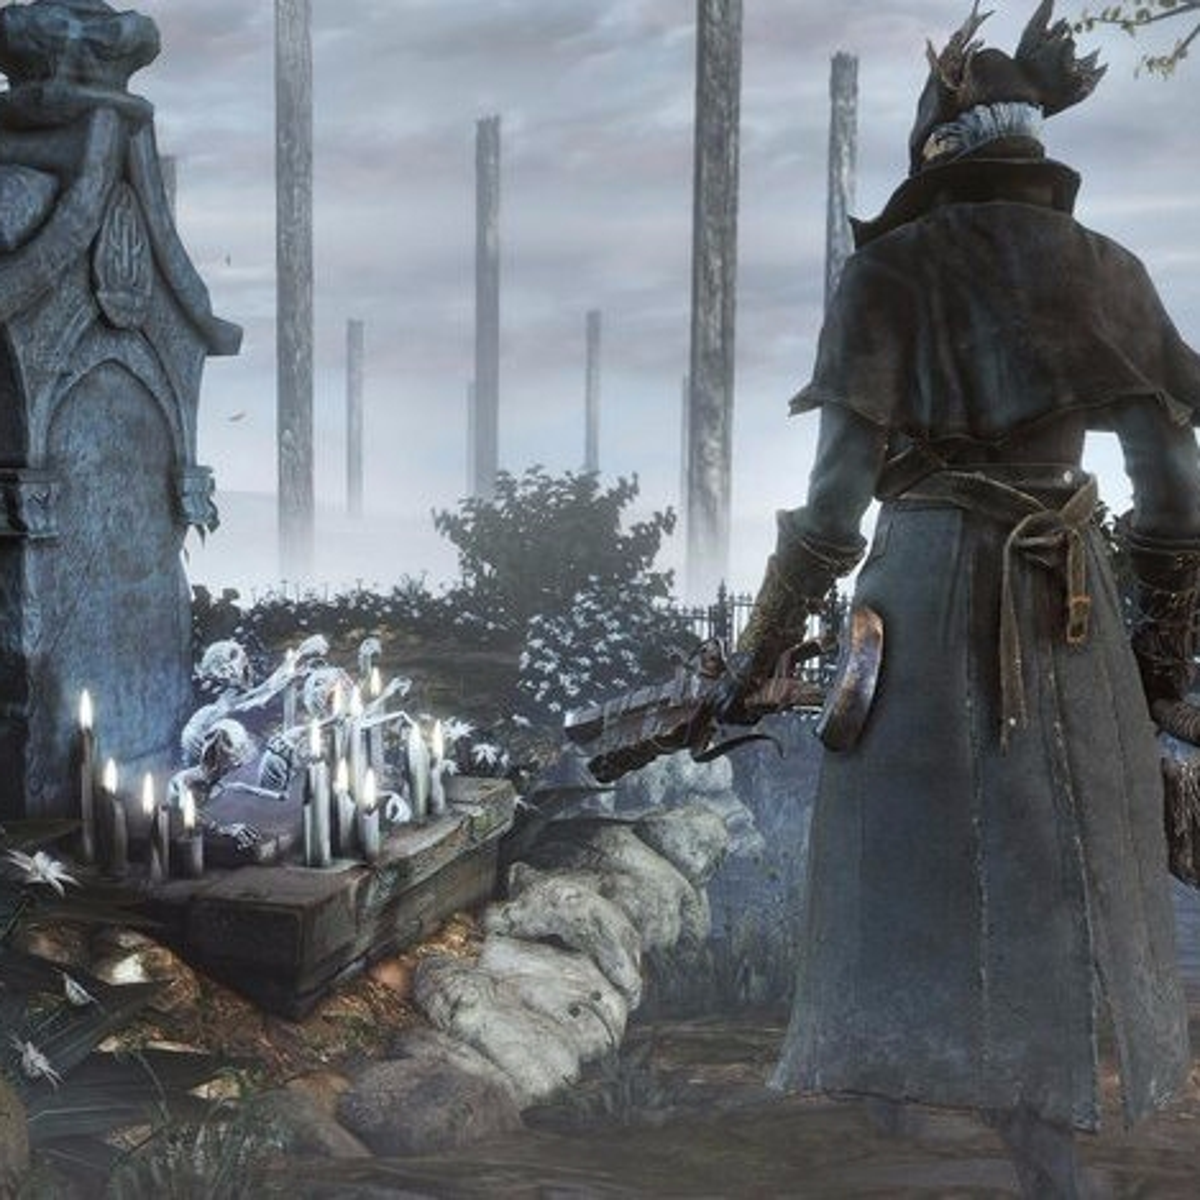 Bloodborne again: Expansion confirmed